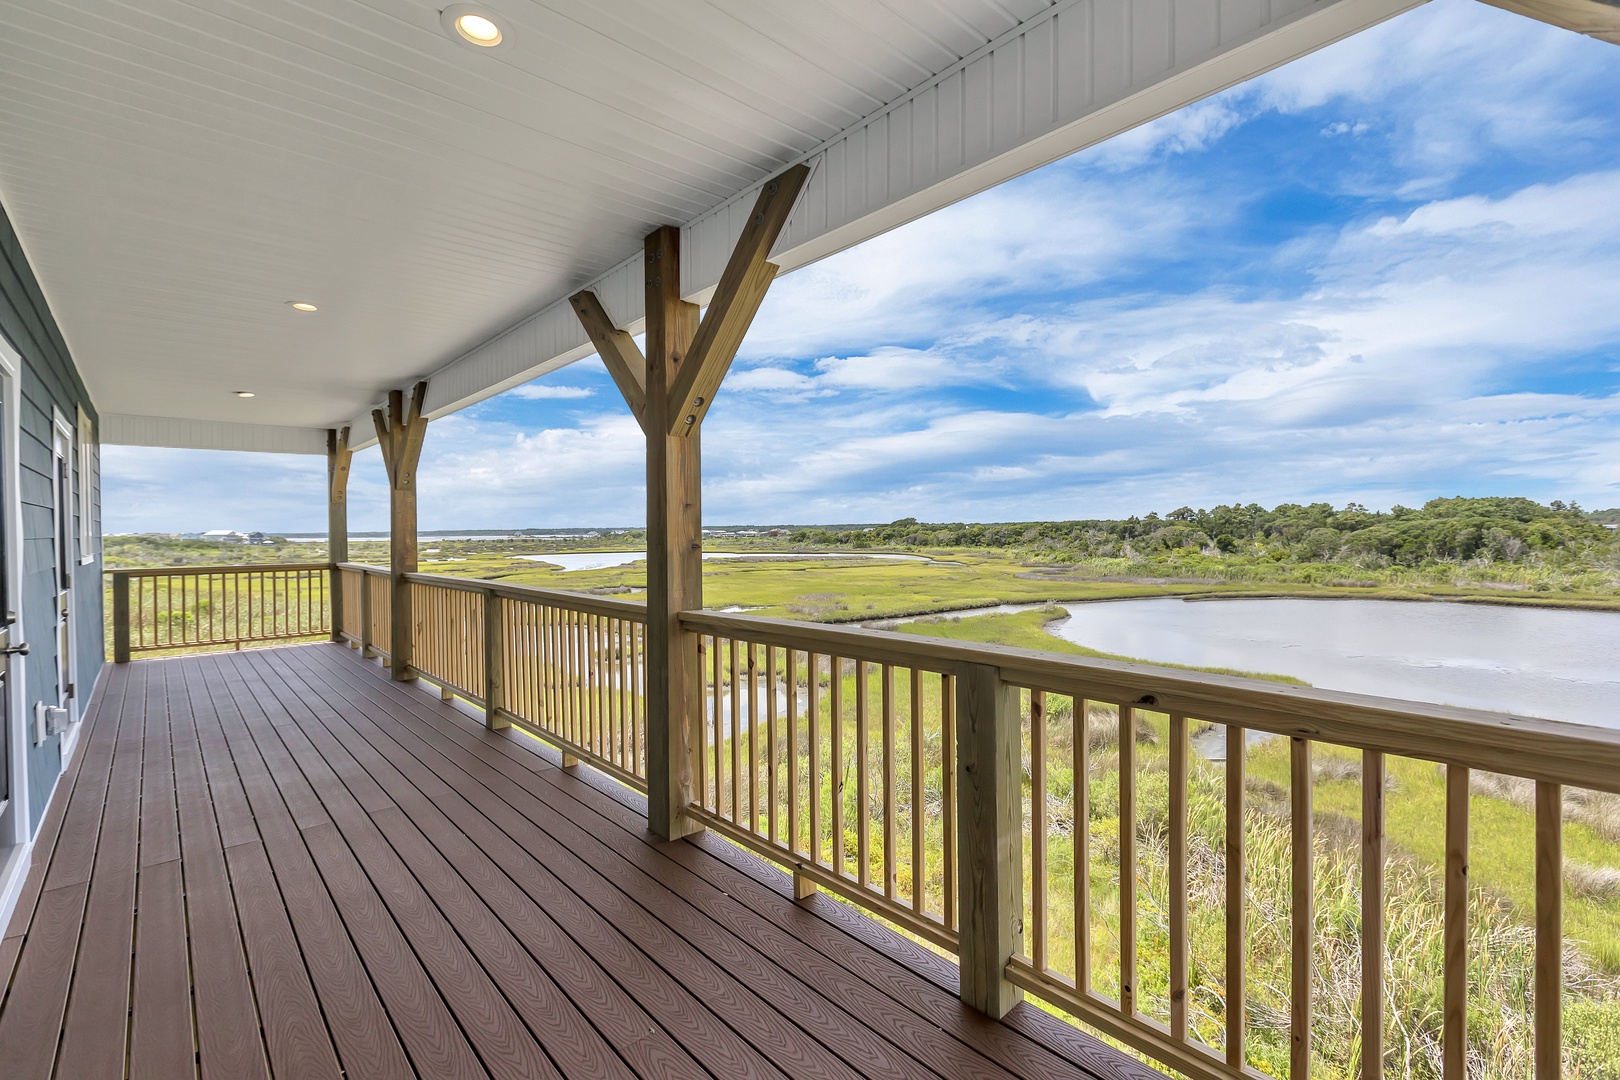 The covered deck with estuary views